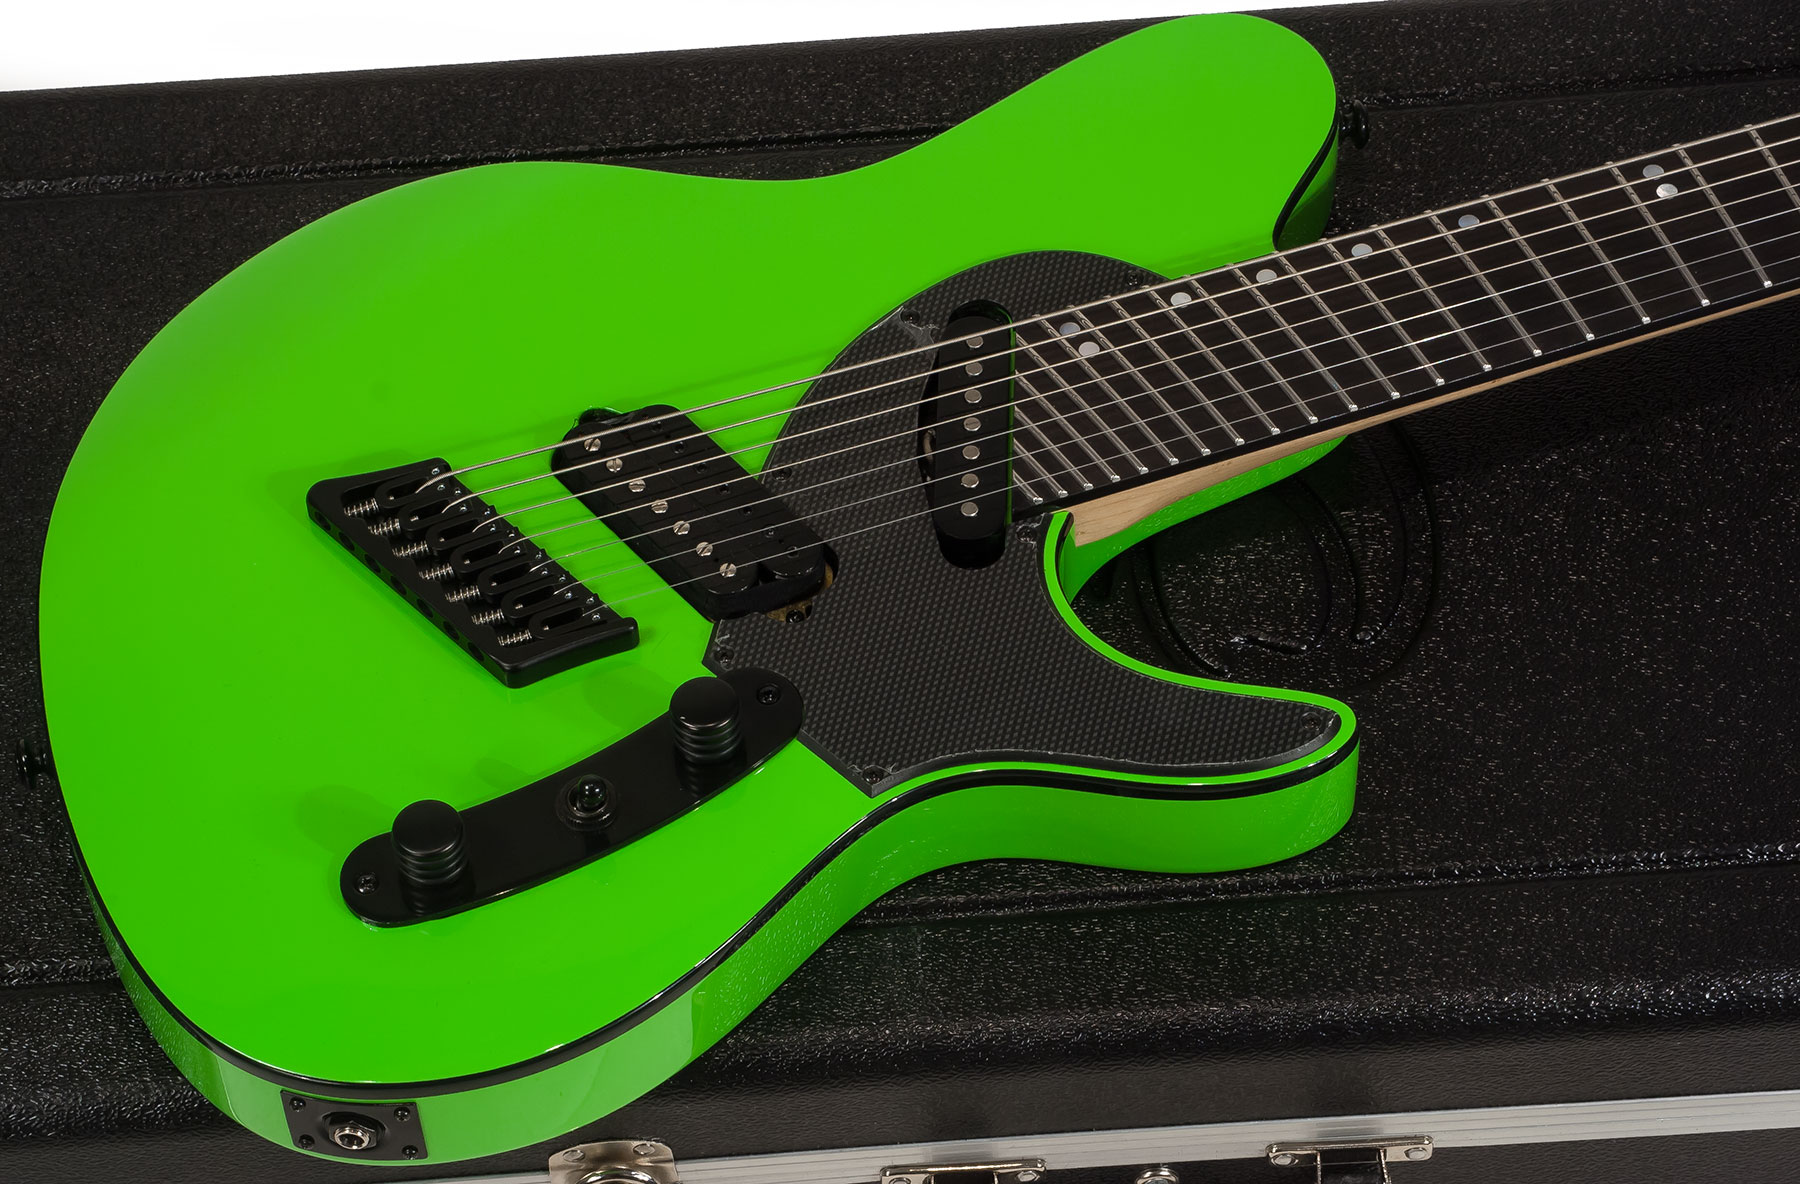 Ormsby Tx Gtr 7 Hs Ht Eb - Chernobyl Green - Guitare Électrique Multi-scale - Variation 1